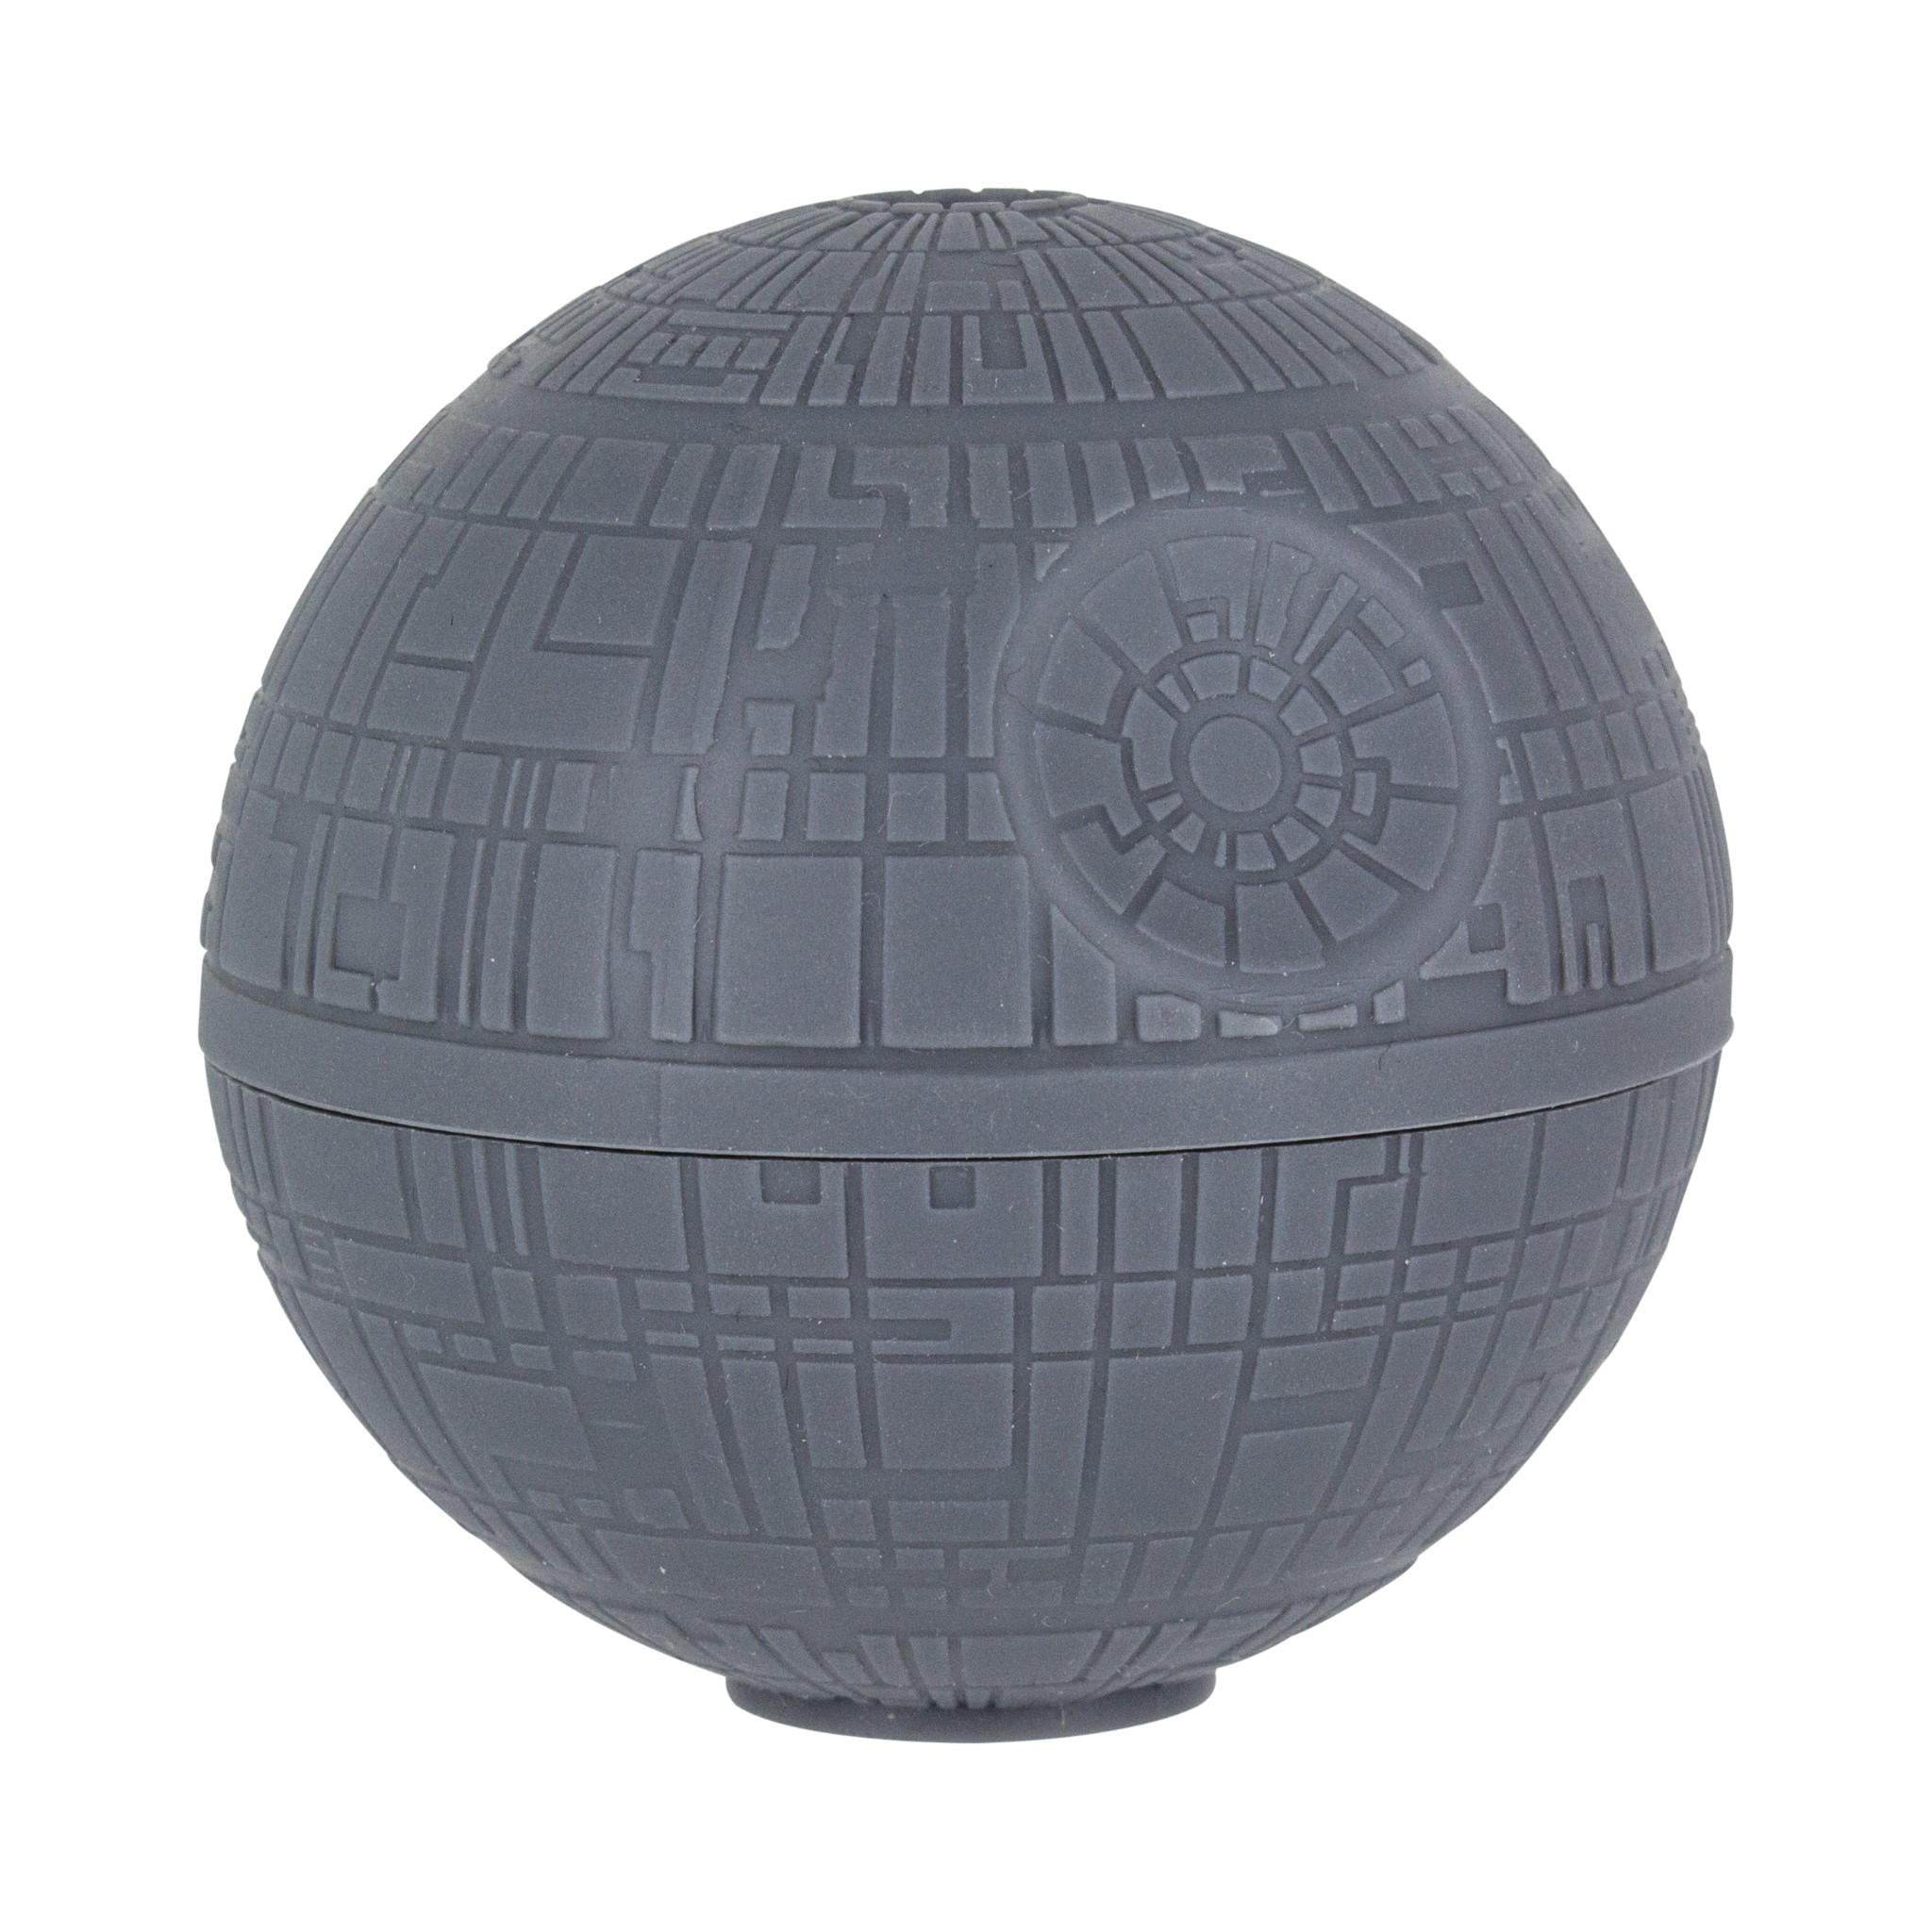 Silicone Star Wars Death Star 3 Ice Cube Mold 3-D Round Ball